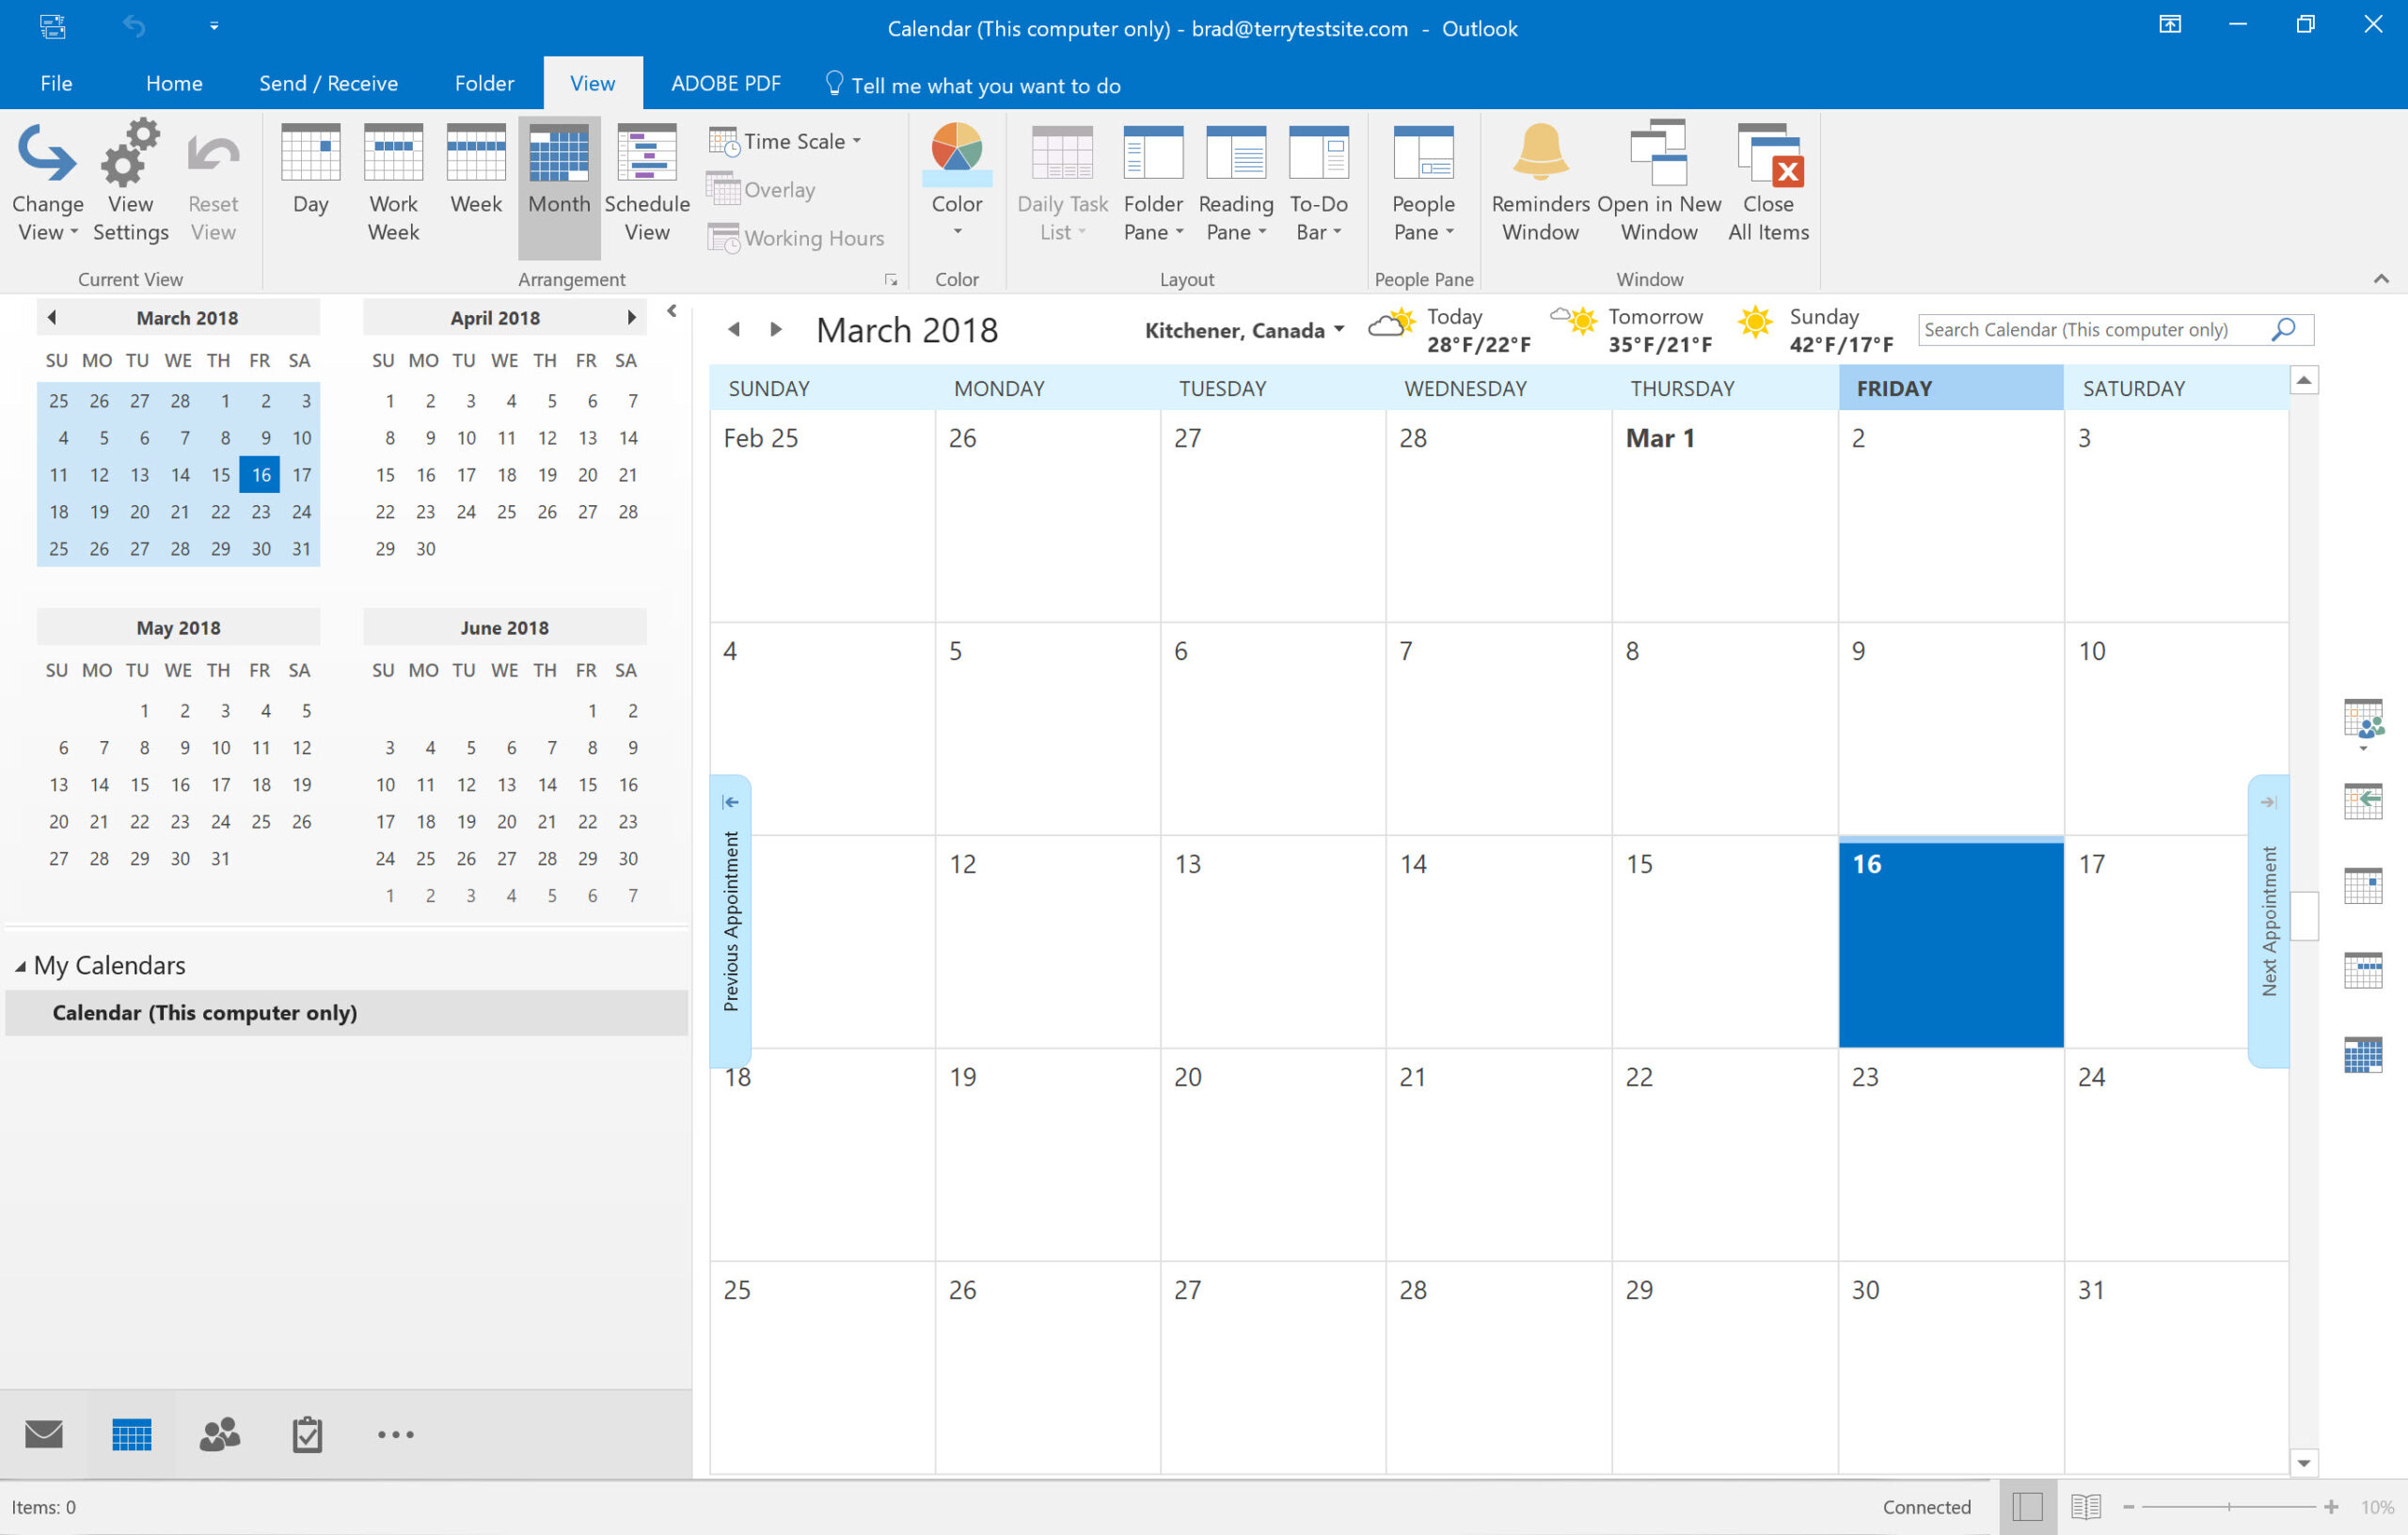 How To View And Customise Calendars In Outlook 2016 pertaining to Outlook Desktop Calendar